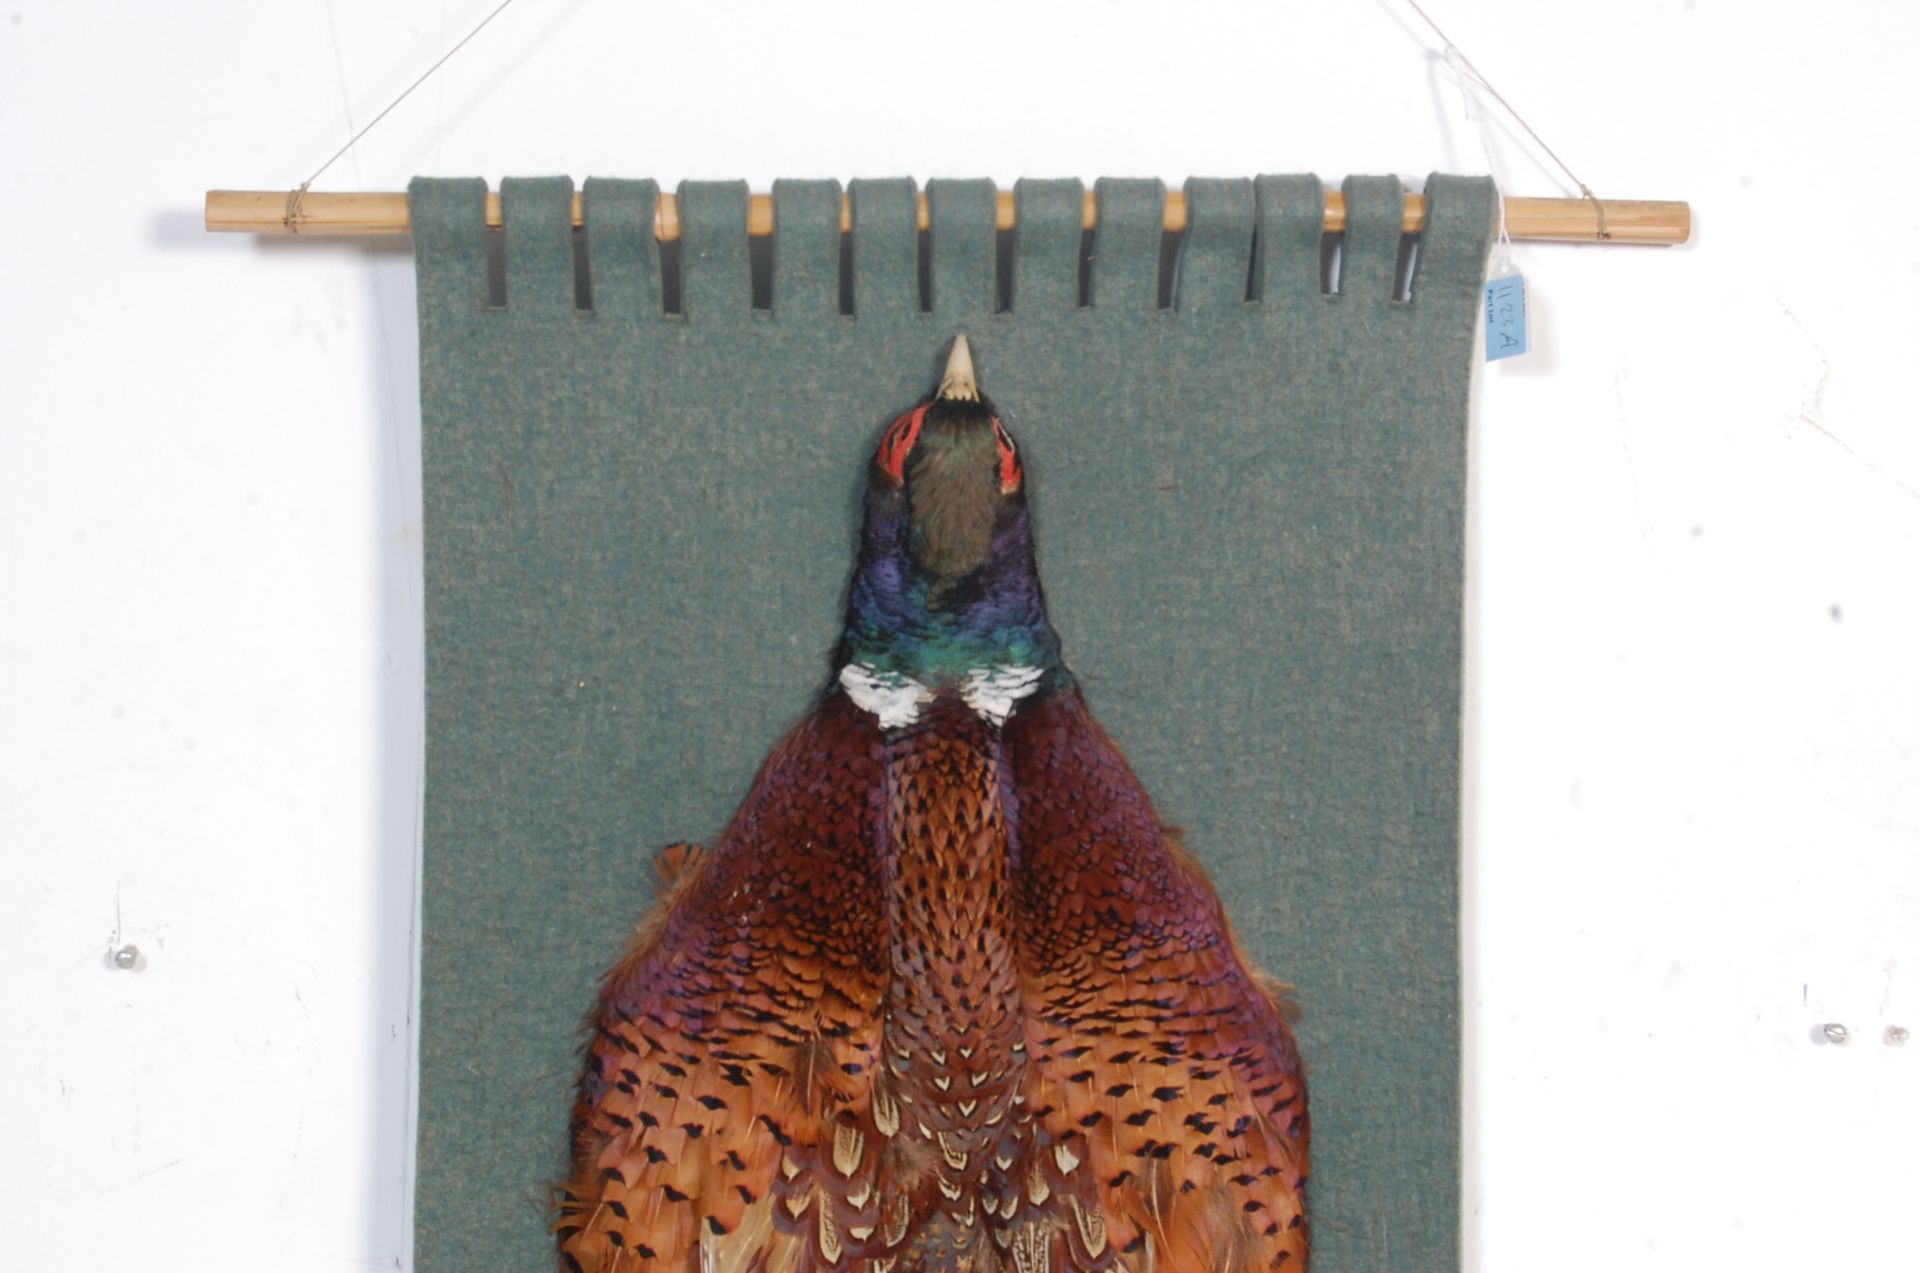 VINTAGE LATE 20TH CENTURY TAXIDERMY WALL HANGING OF A PHEASANT - Image 3 of 6